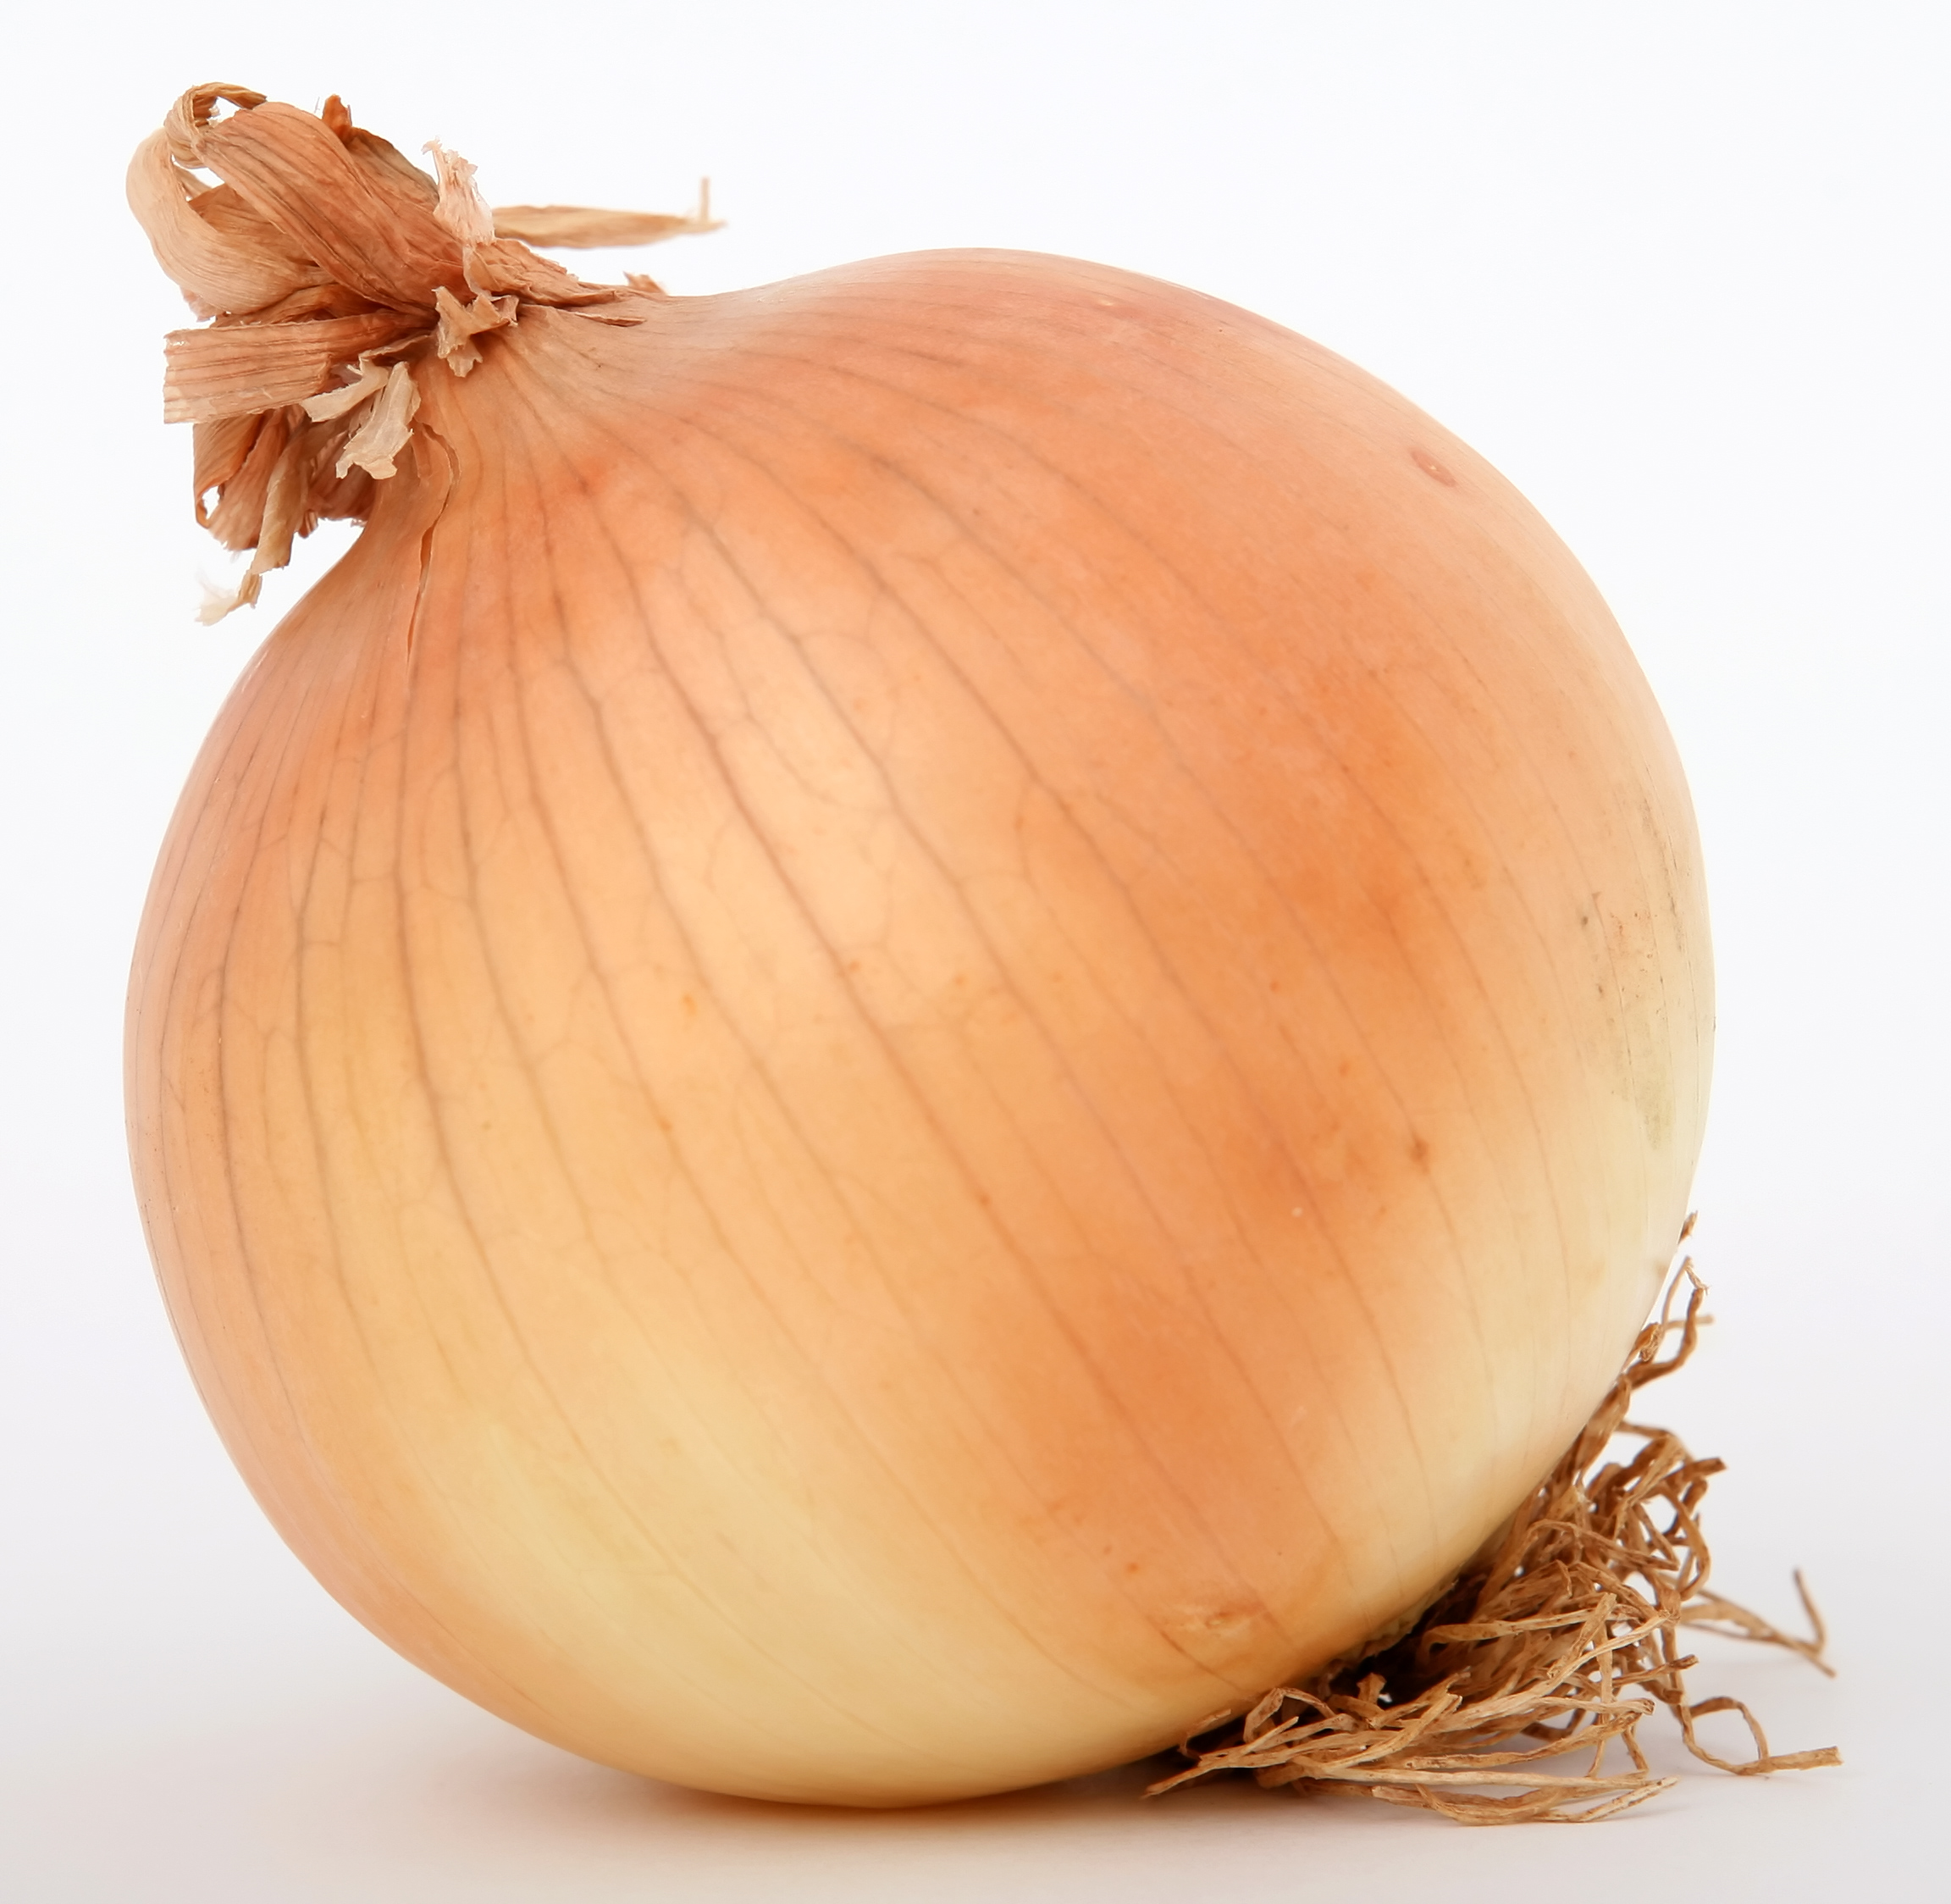 The meaning of the dream in which you saw «Onion»